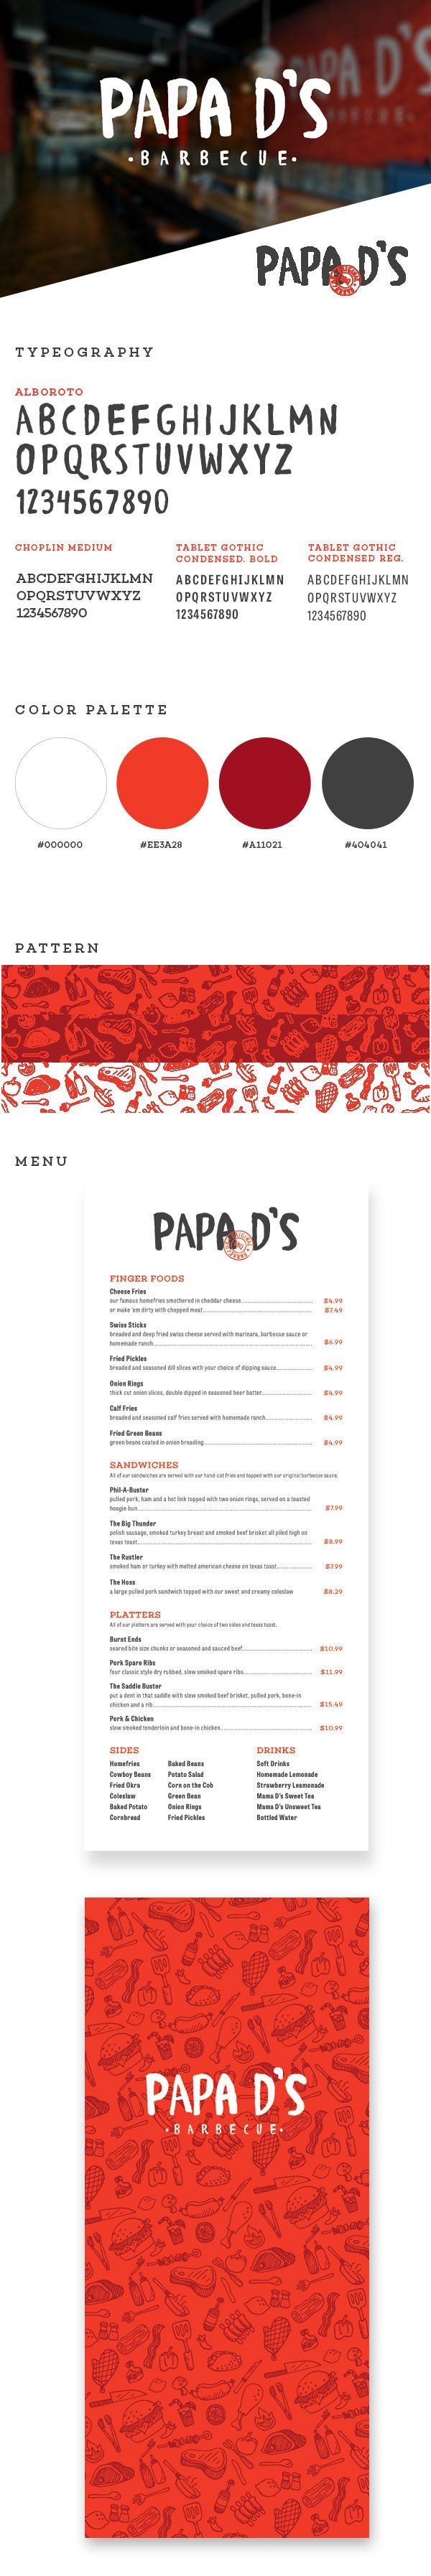 Papa D's Barbecue Branding on Behance